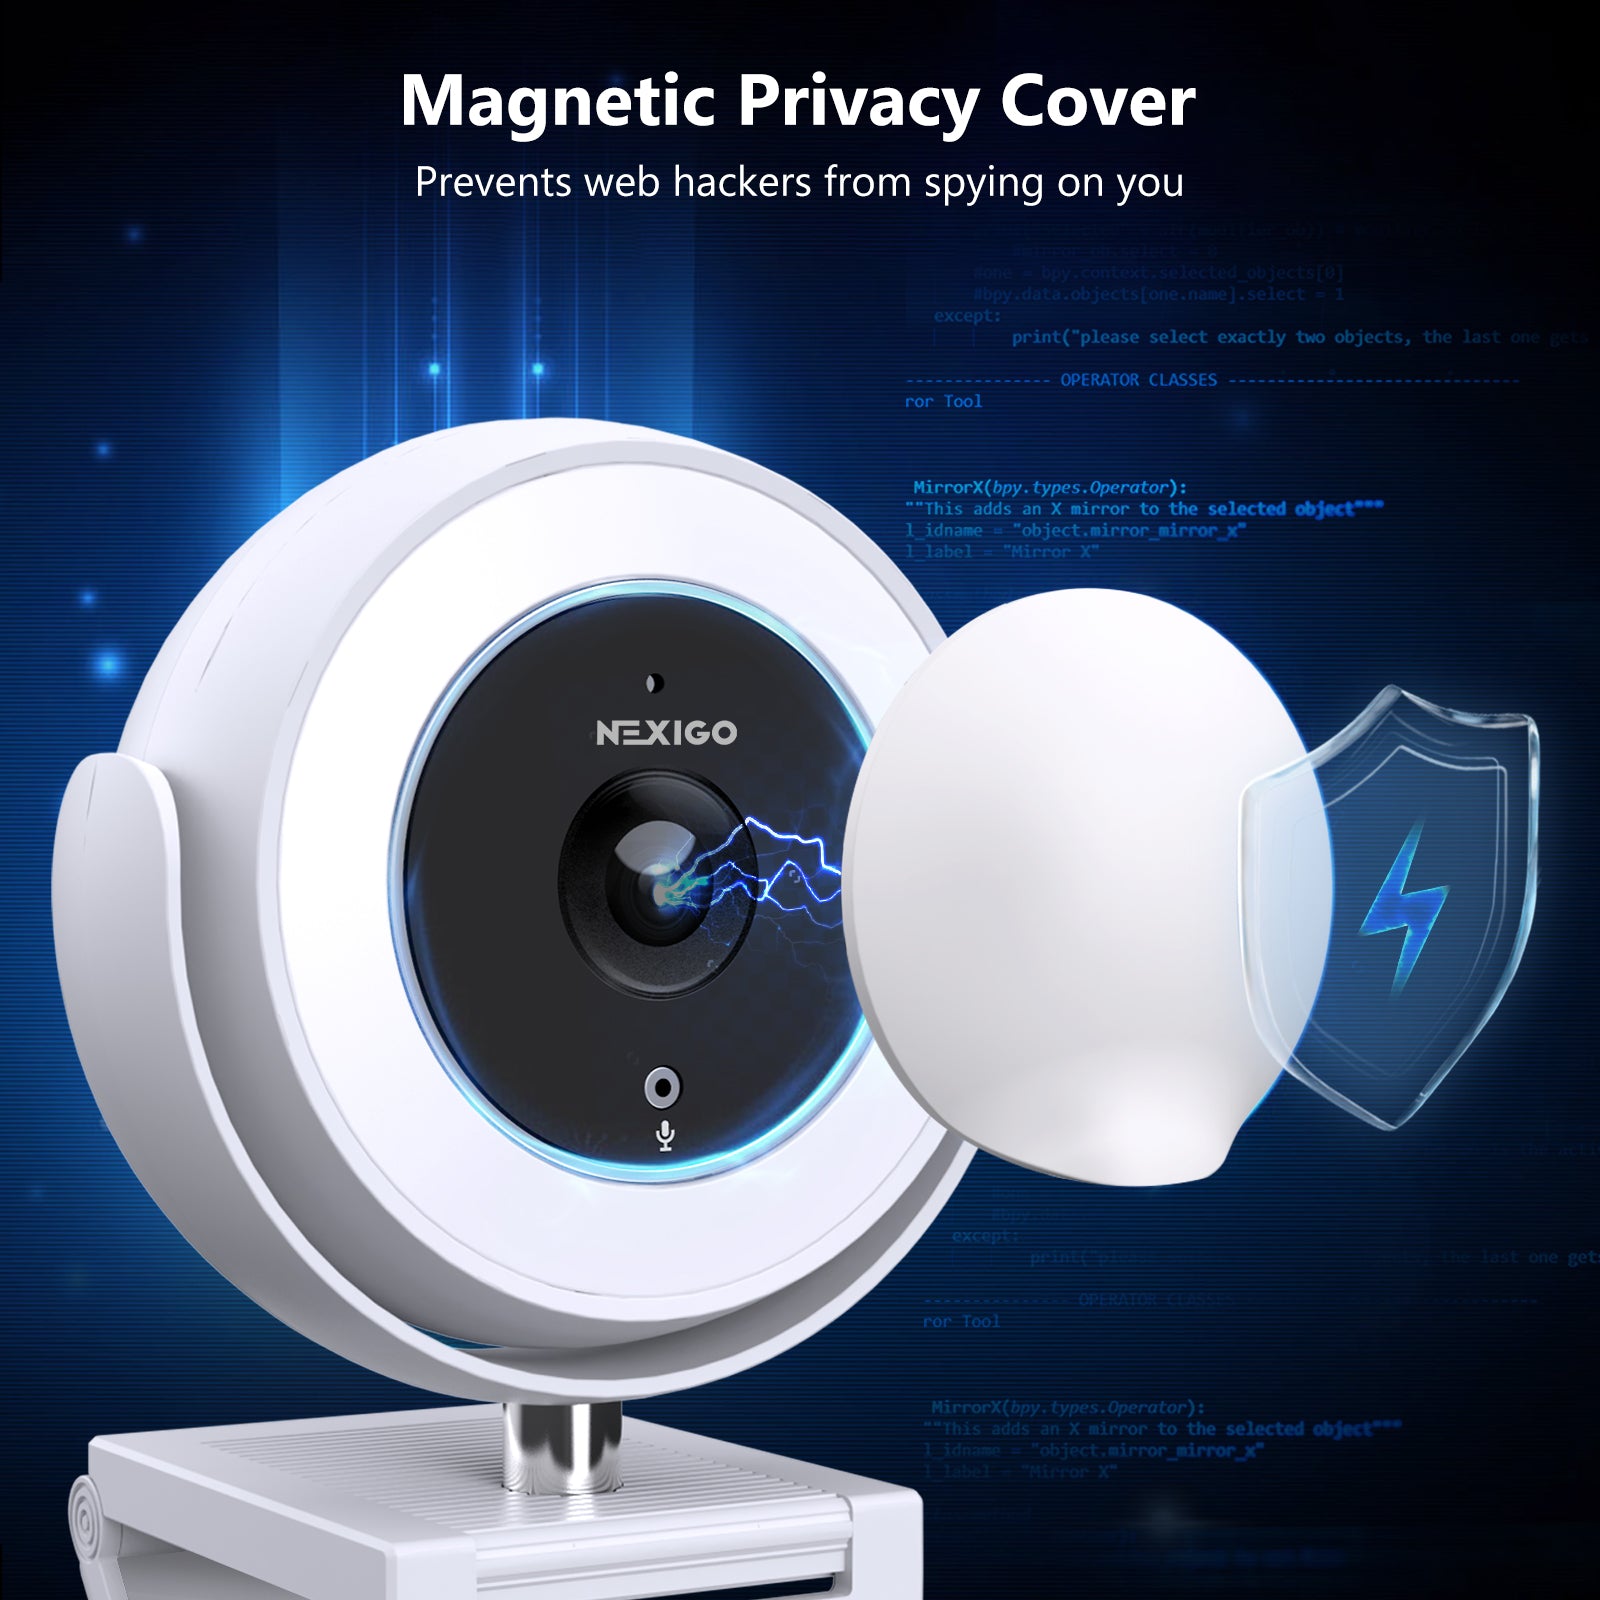 A magnetic privacy cover can be used to block the webcam lens and prevent online hackers from monitoring you.